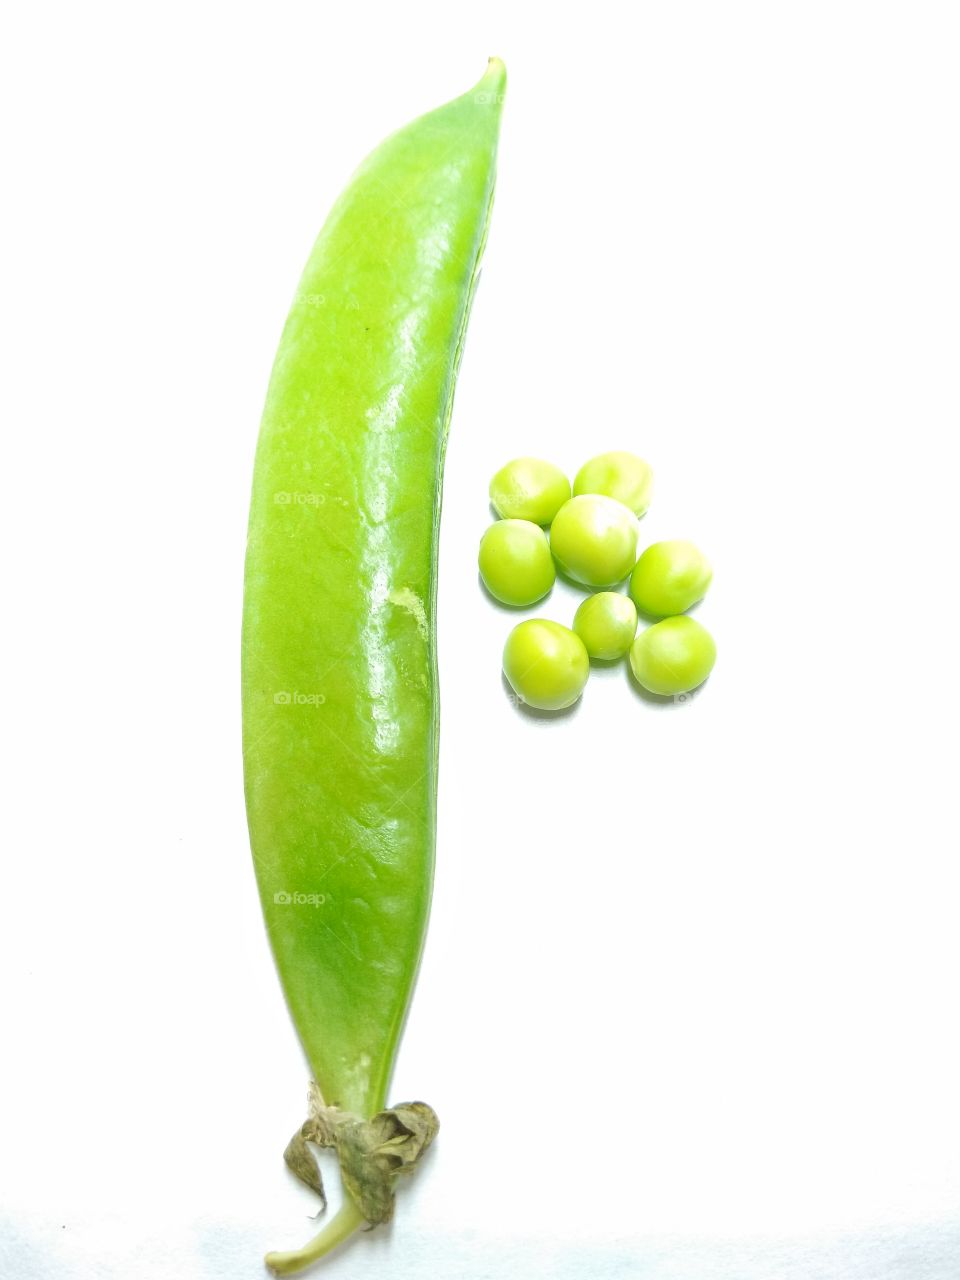 A picture of pea pod on white background